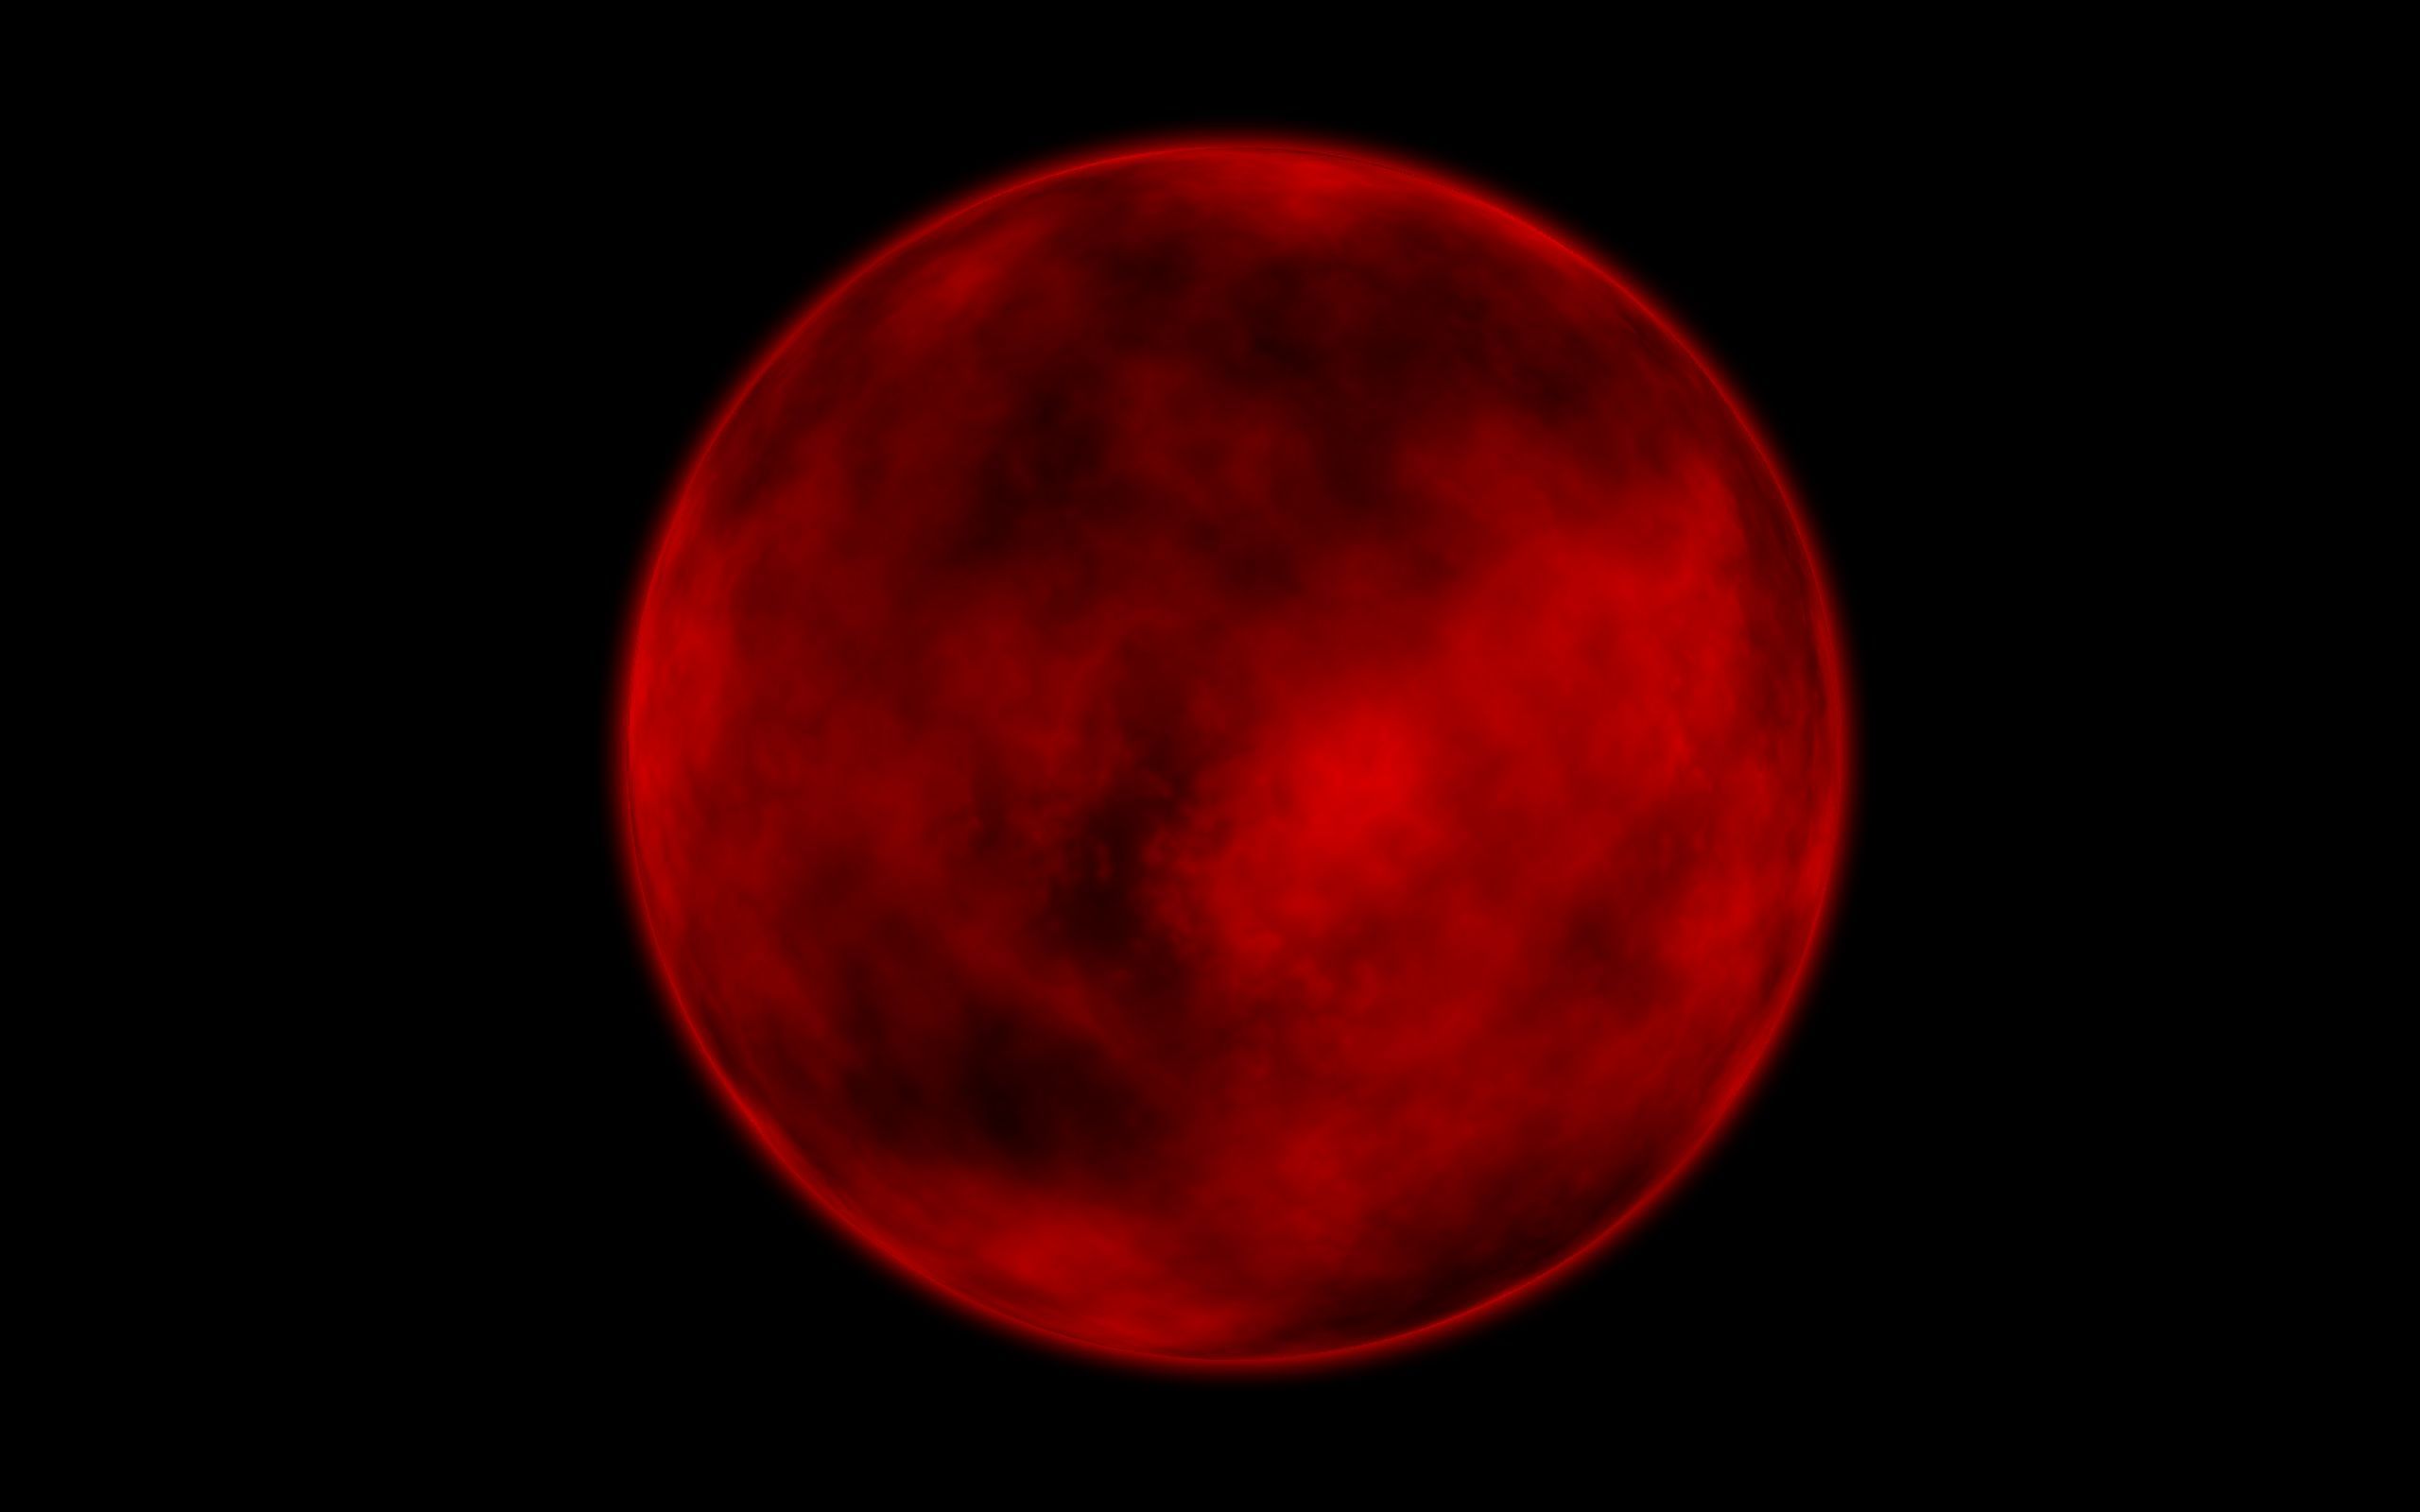 Blood Red Moon Wallpaper | HD Wallpapers | Pinterest | Red moon ...